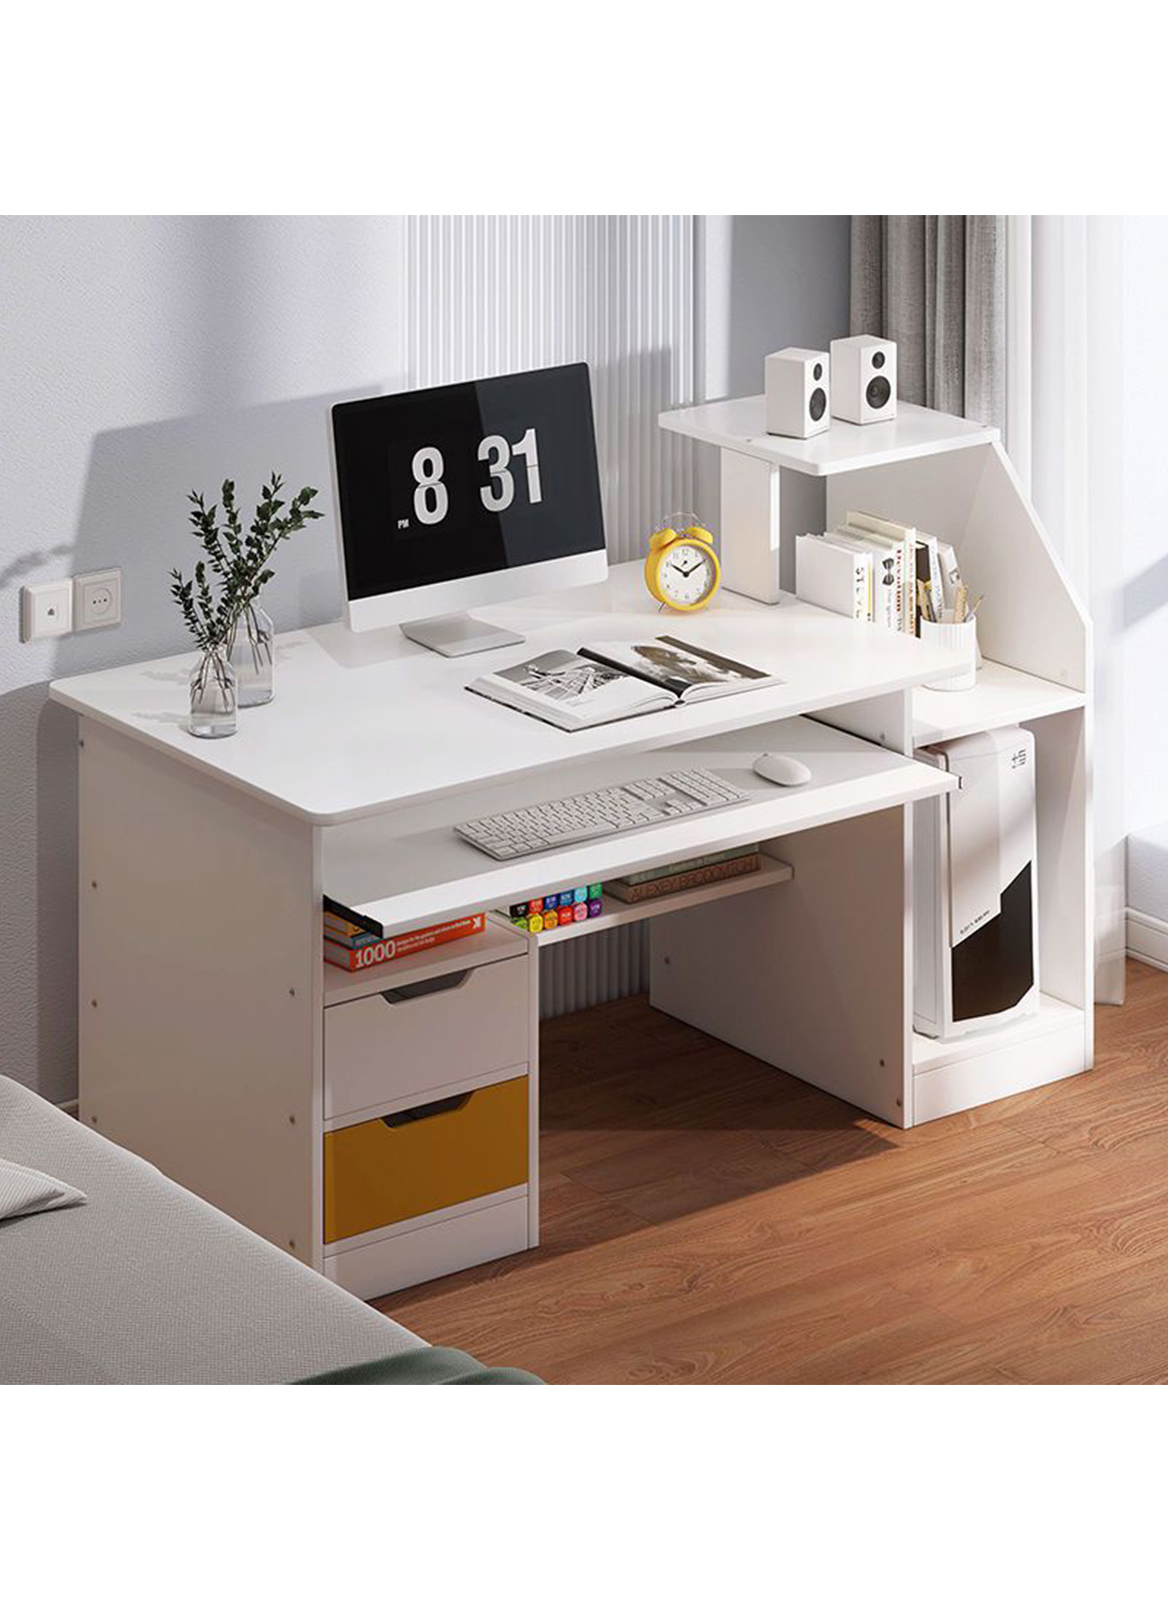 Modern Home Office Desk Study Desk with Drawers for Storage 98*40*92cm